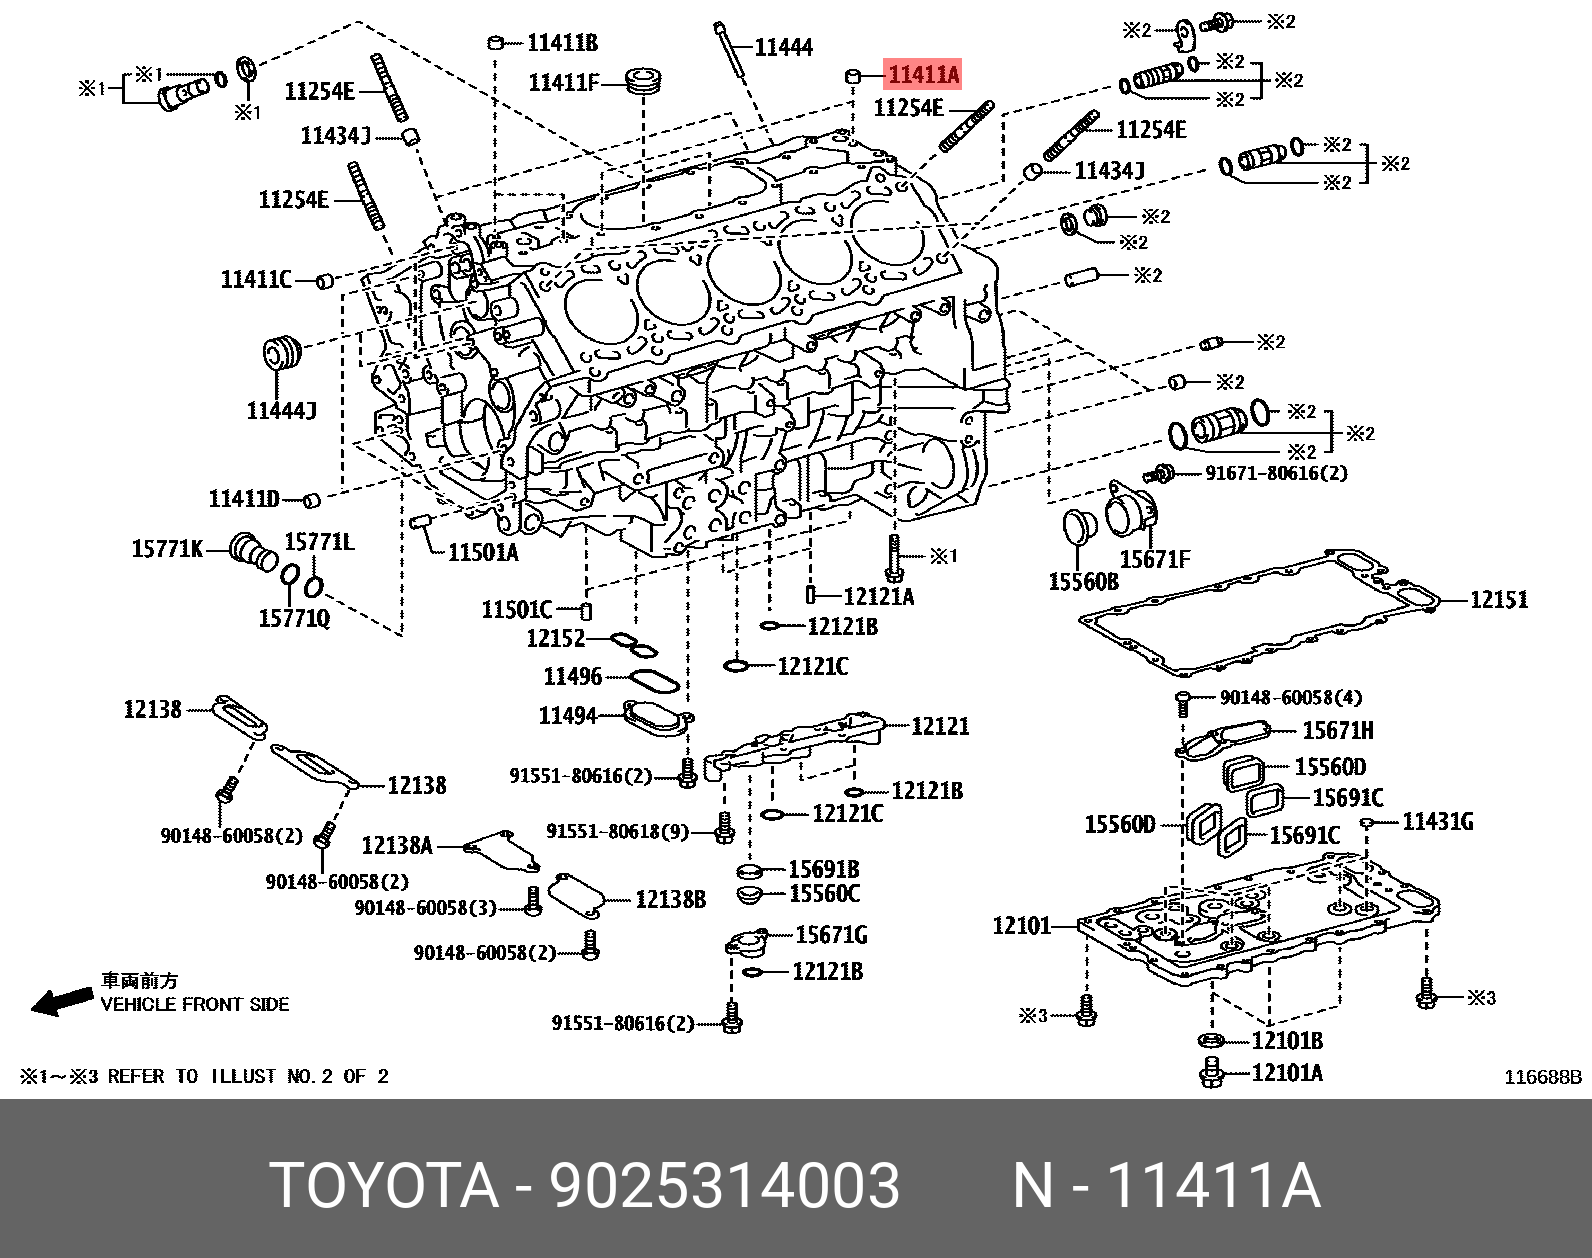 CAMRY 200601 - 201108, PIN, STRAIGHT (FOR CYLINDER HEAD SET)